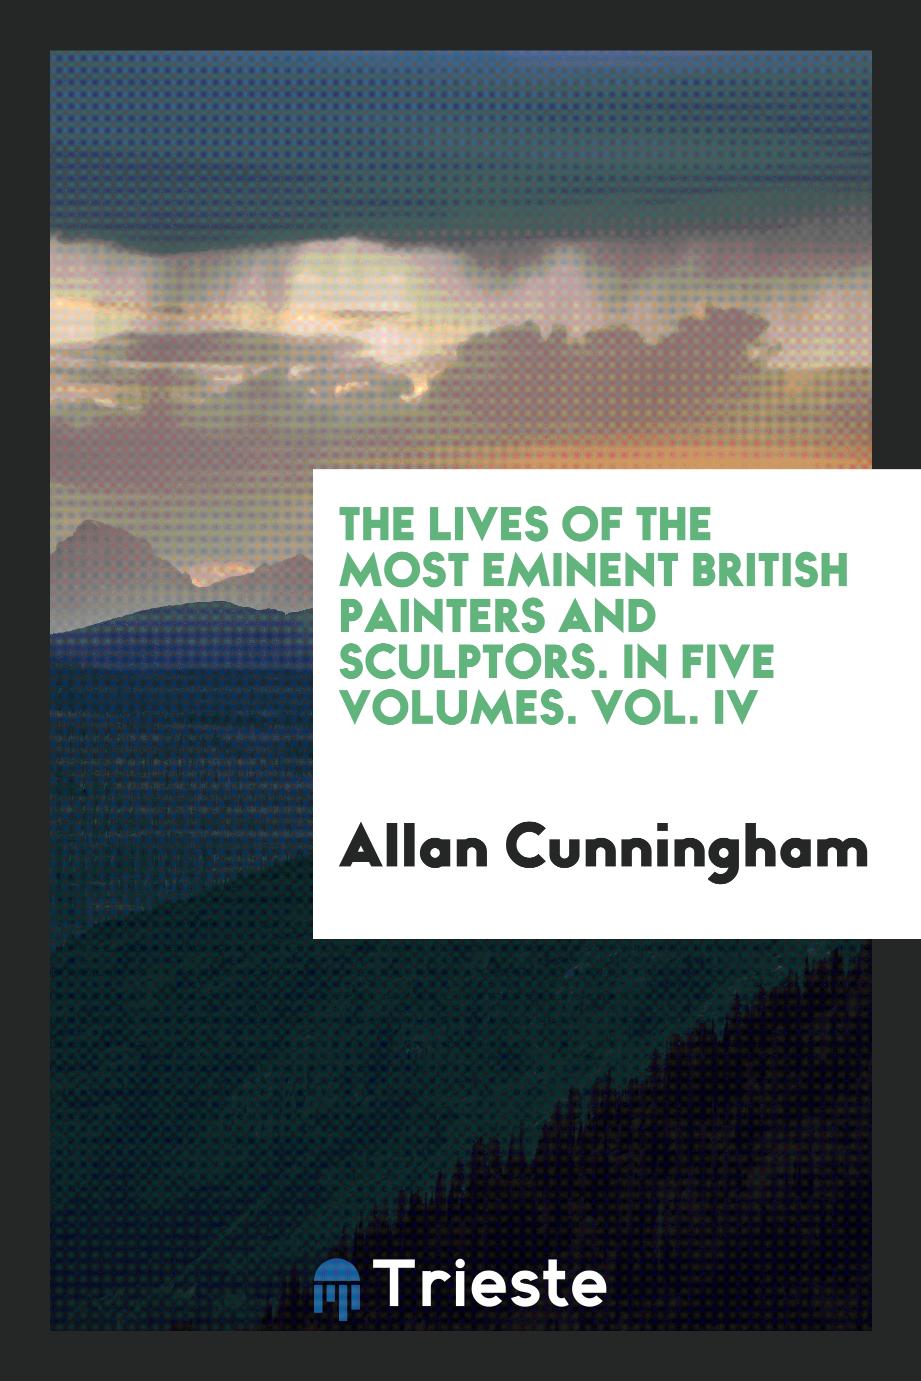 The Lives of the Most Eminent British Painters and Sculptors. In Five Volumes. Vol. IV